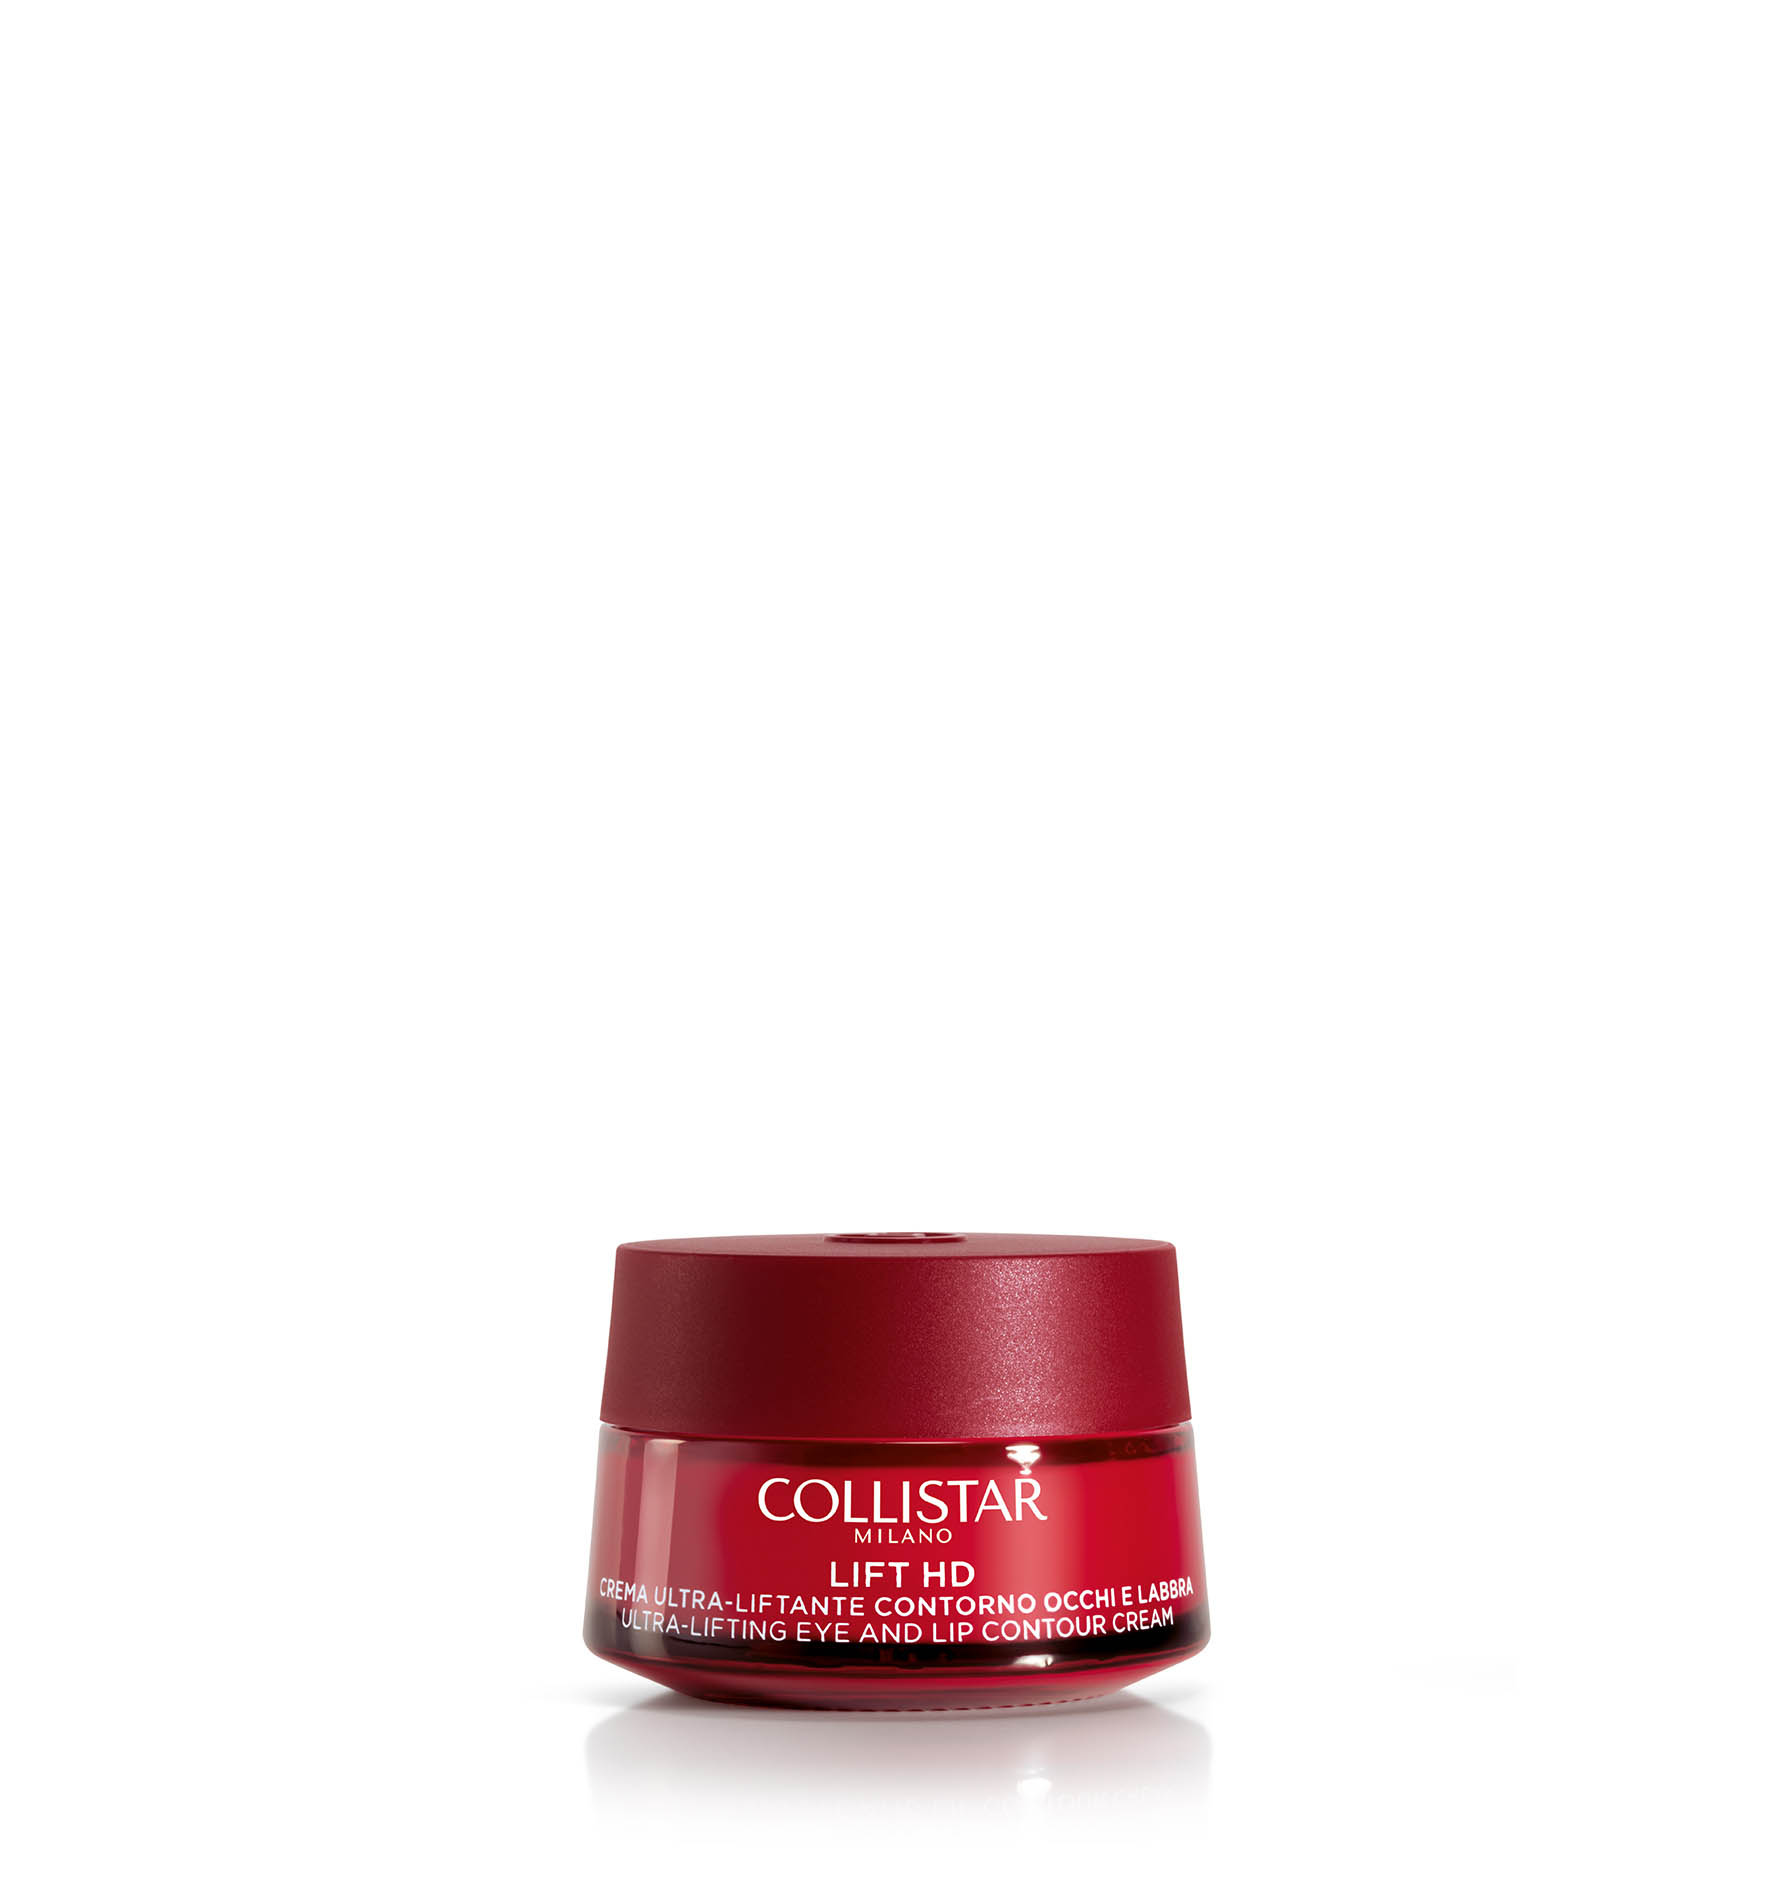 ULTRA-LIFTING EYE AND LIP CONTOUR CREAM - Wrinkles | Collistar - Shop Online Ufficiale